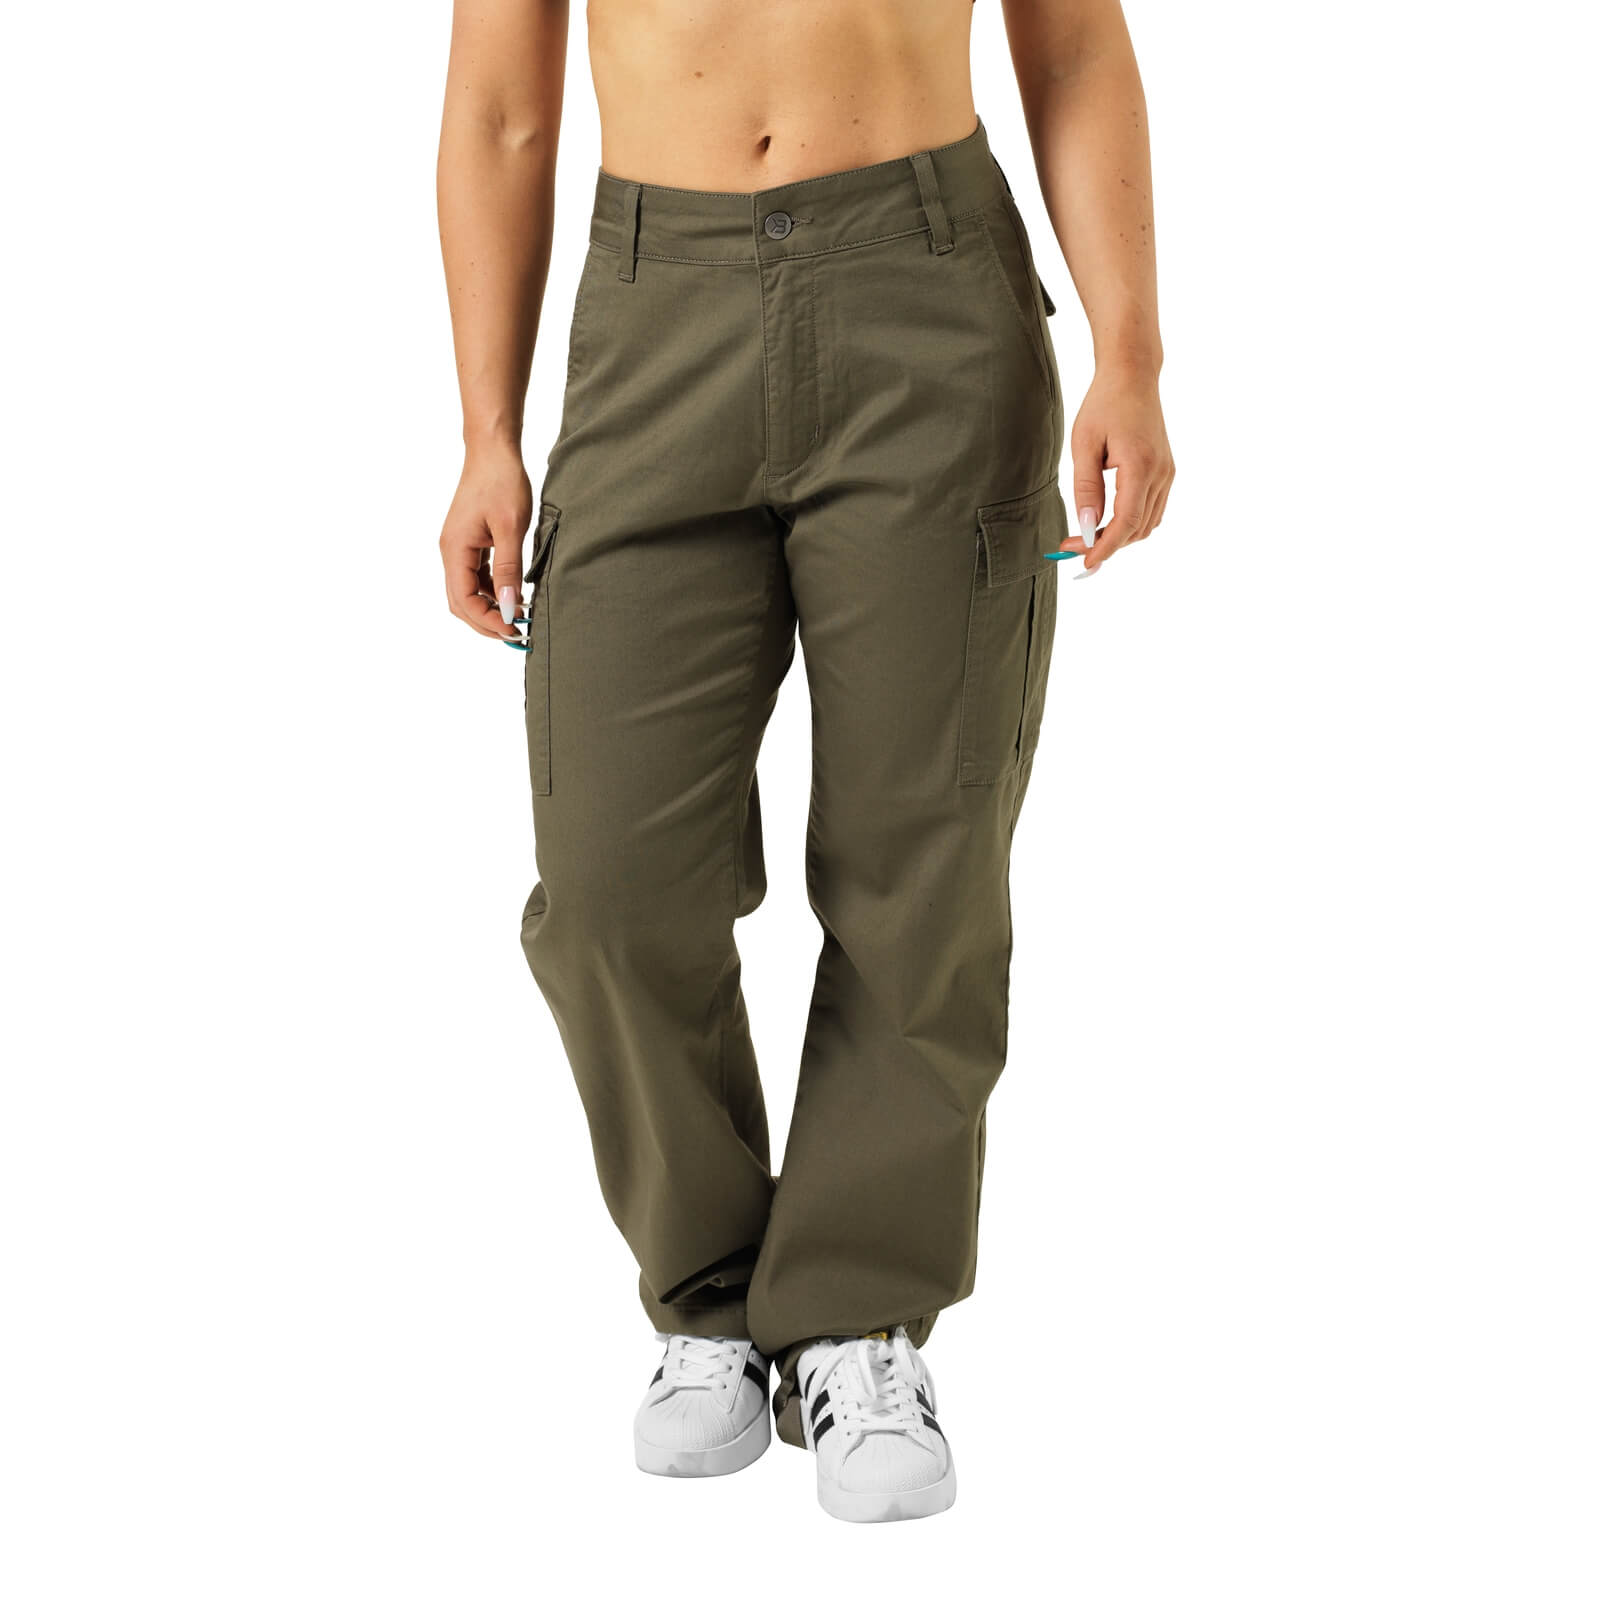 Bowery Cargos, wash green, Better Bodies